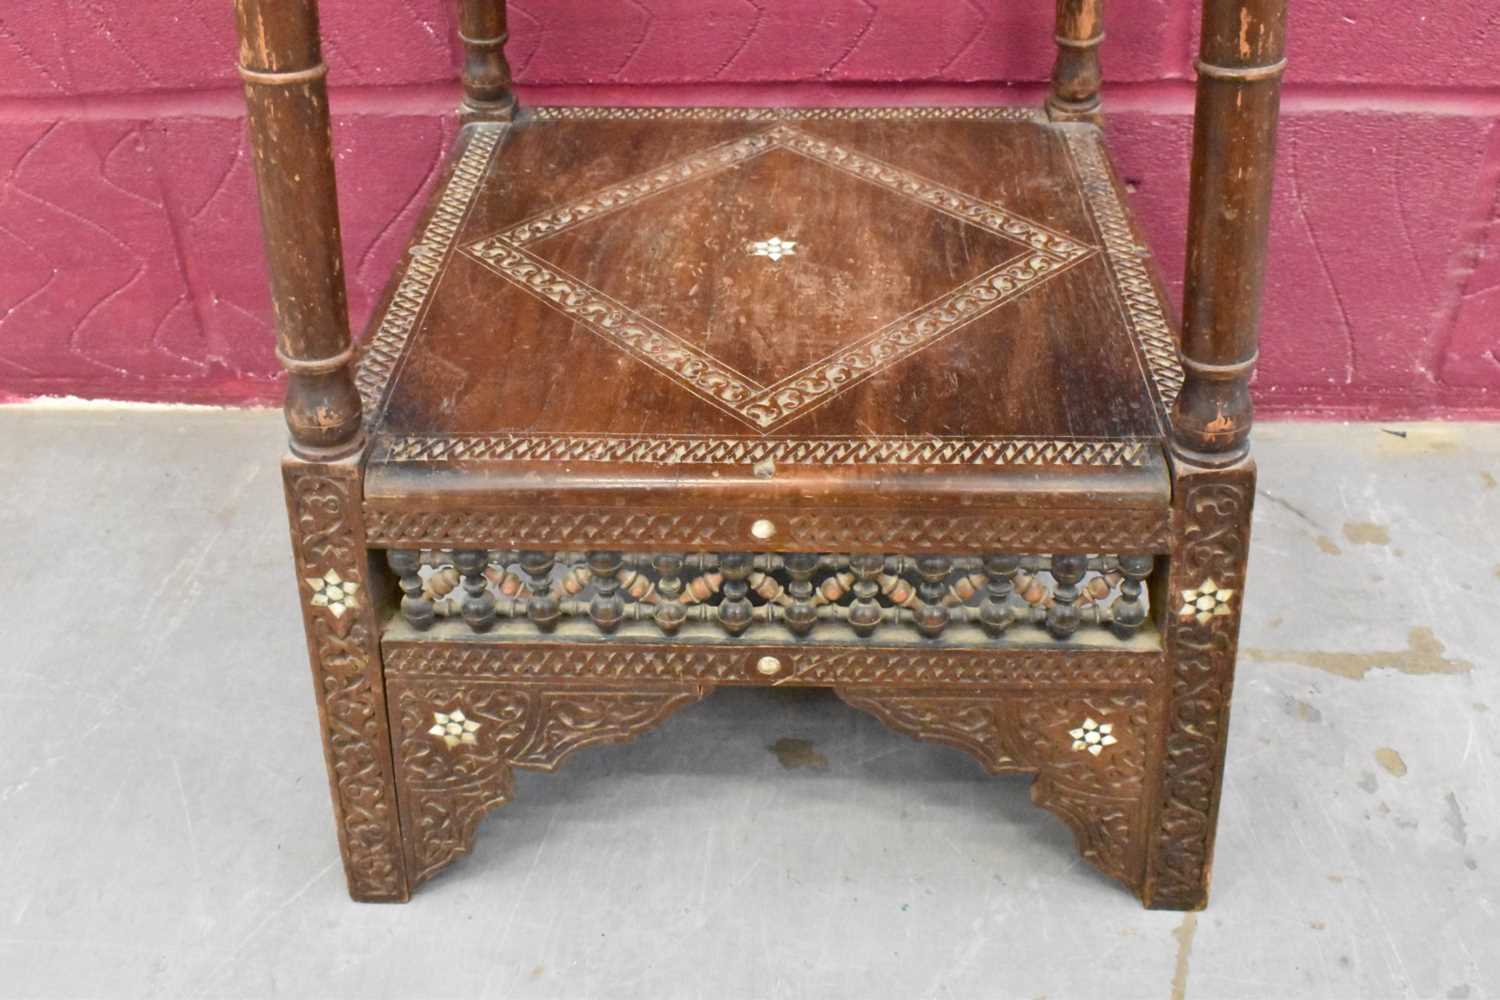 Antique Islamic mother of pearl inlaid plant stand, Syria - Image 4 of 5